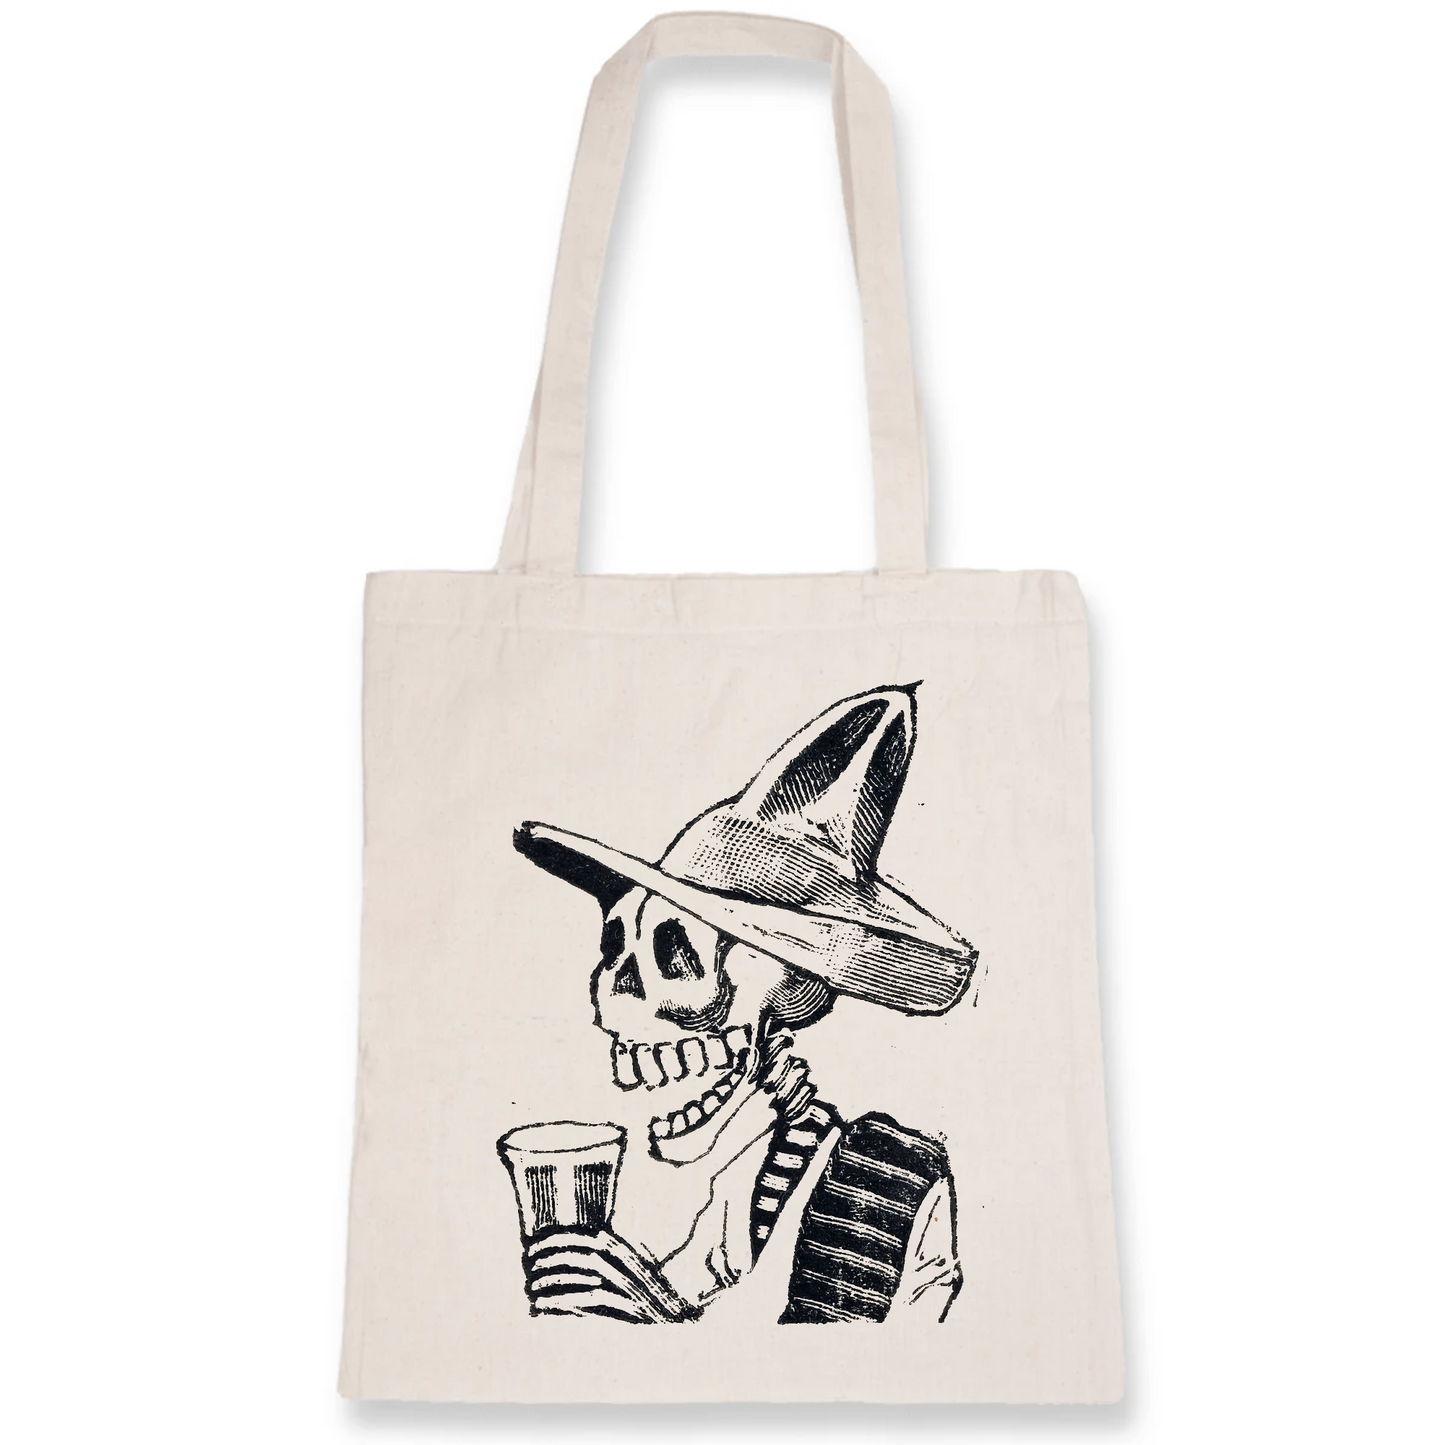 A 100% organic cotton Totye bag featuring a skeleton wearing a hat and having a drink (vignette for the feast of the dead) ca. 1890–1910 by José Guadalupe Posada.